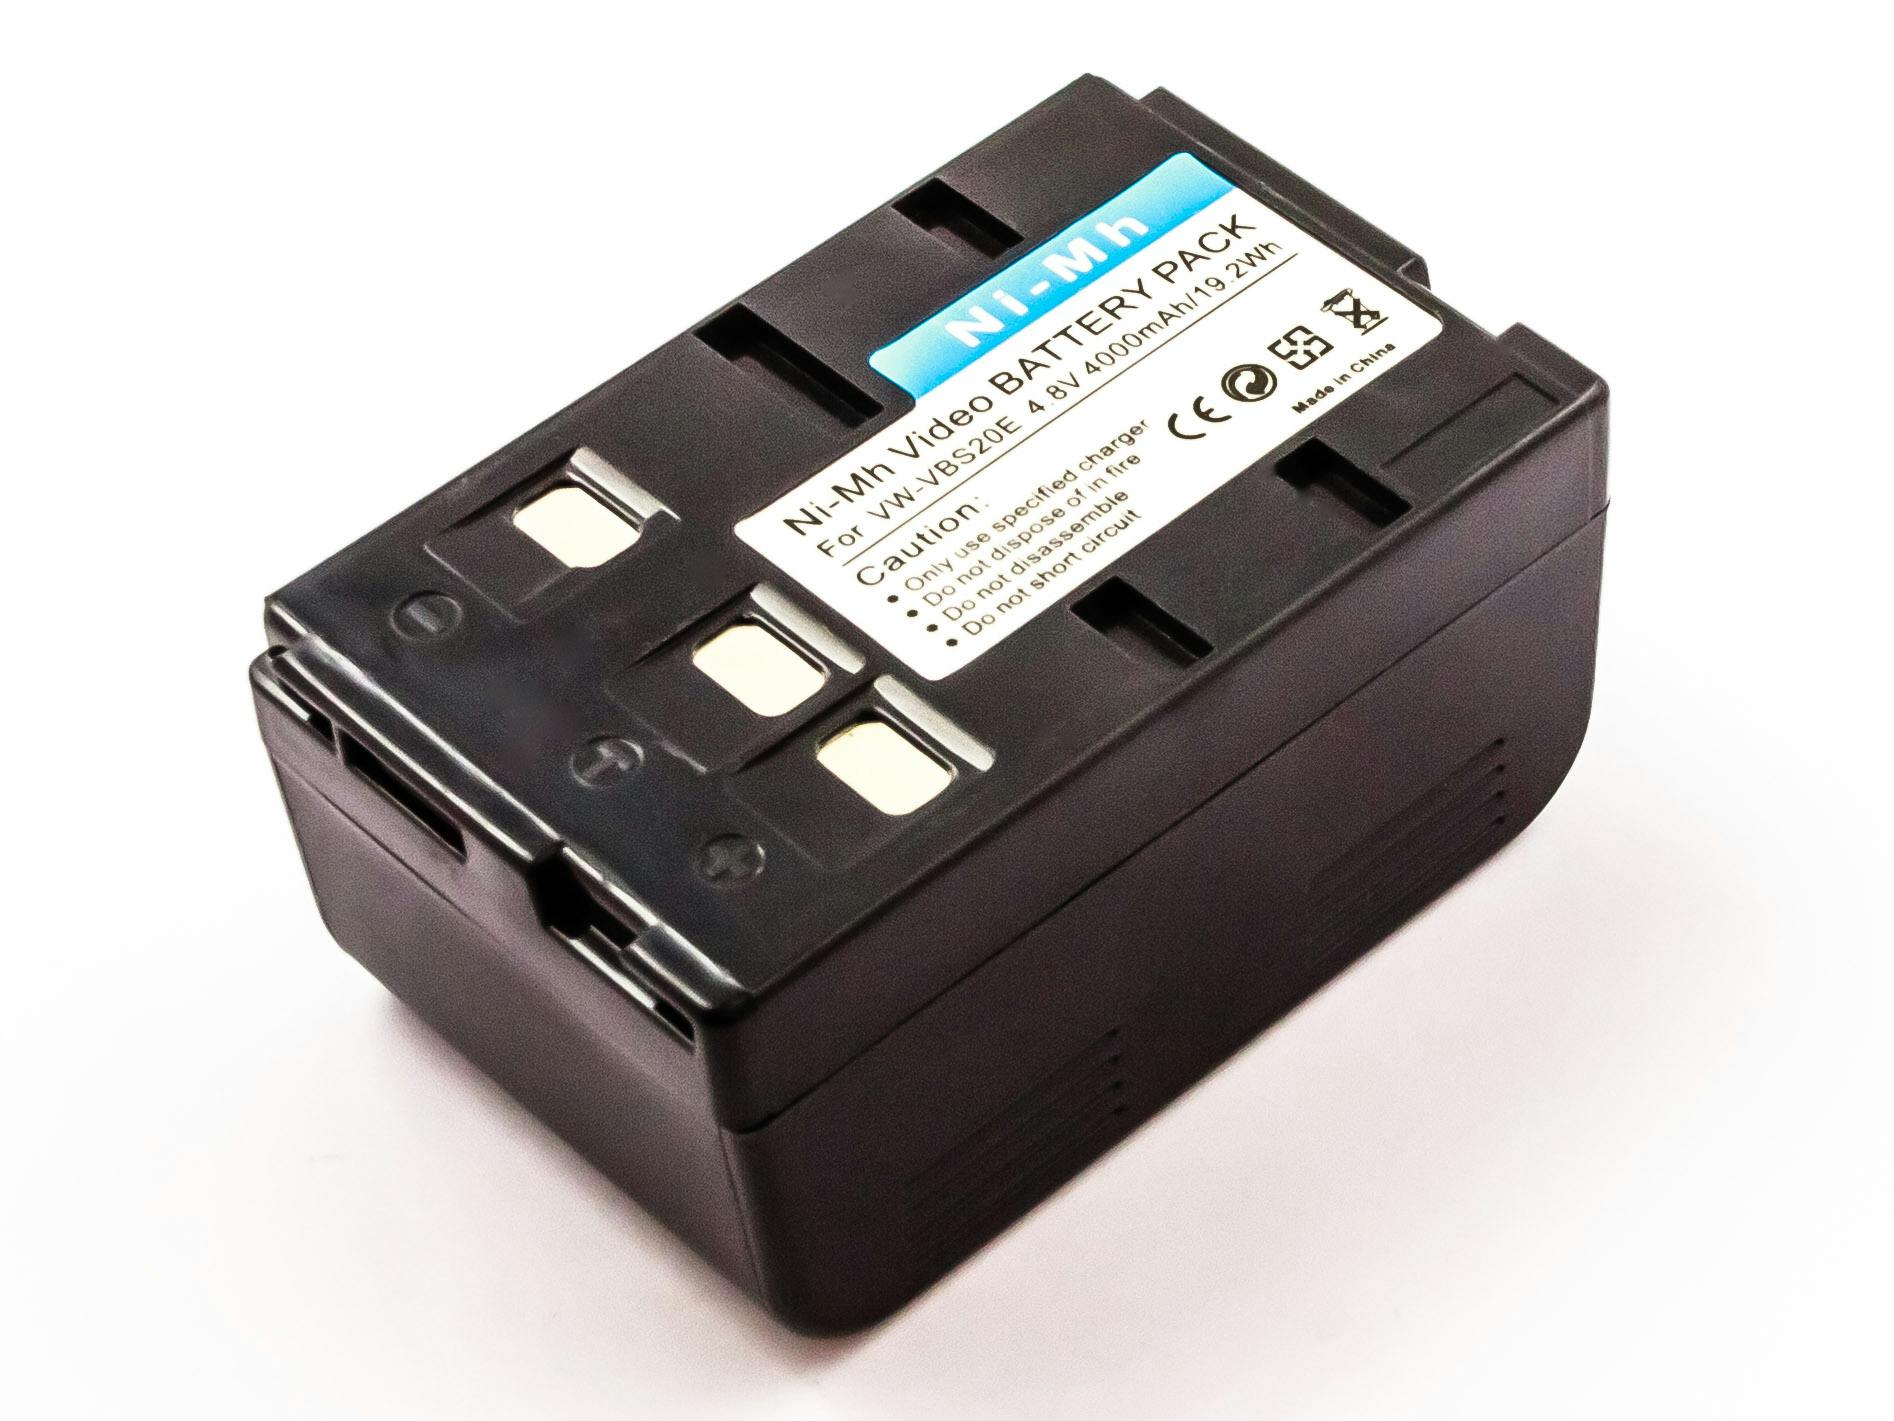 E battery. Аккумулятор BP 74lh. GP Camcorder Battery. Блок аккумуляторный Drager t4 NIMH (83 18 704). Model 1231 spare Duracell dr11 Battery..